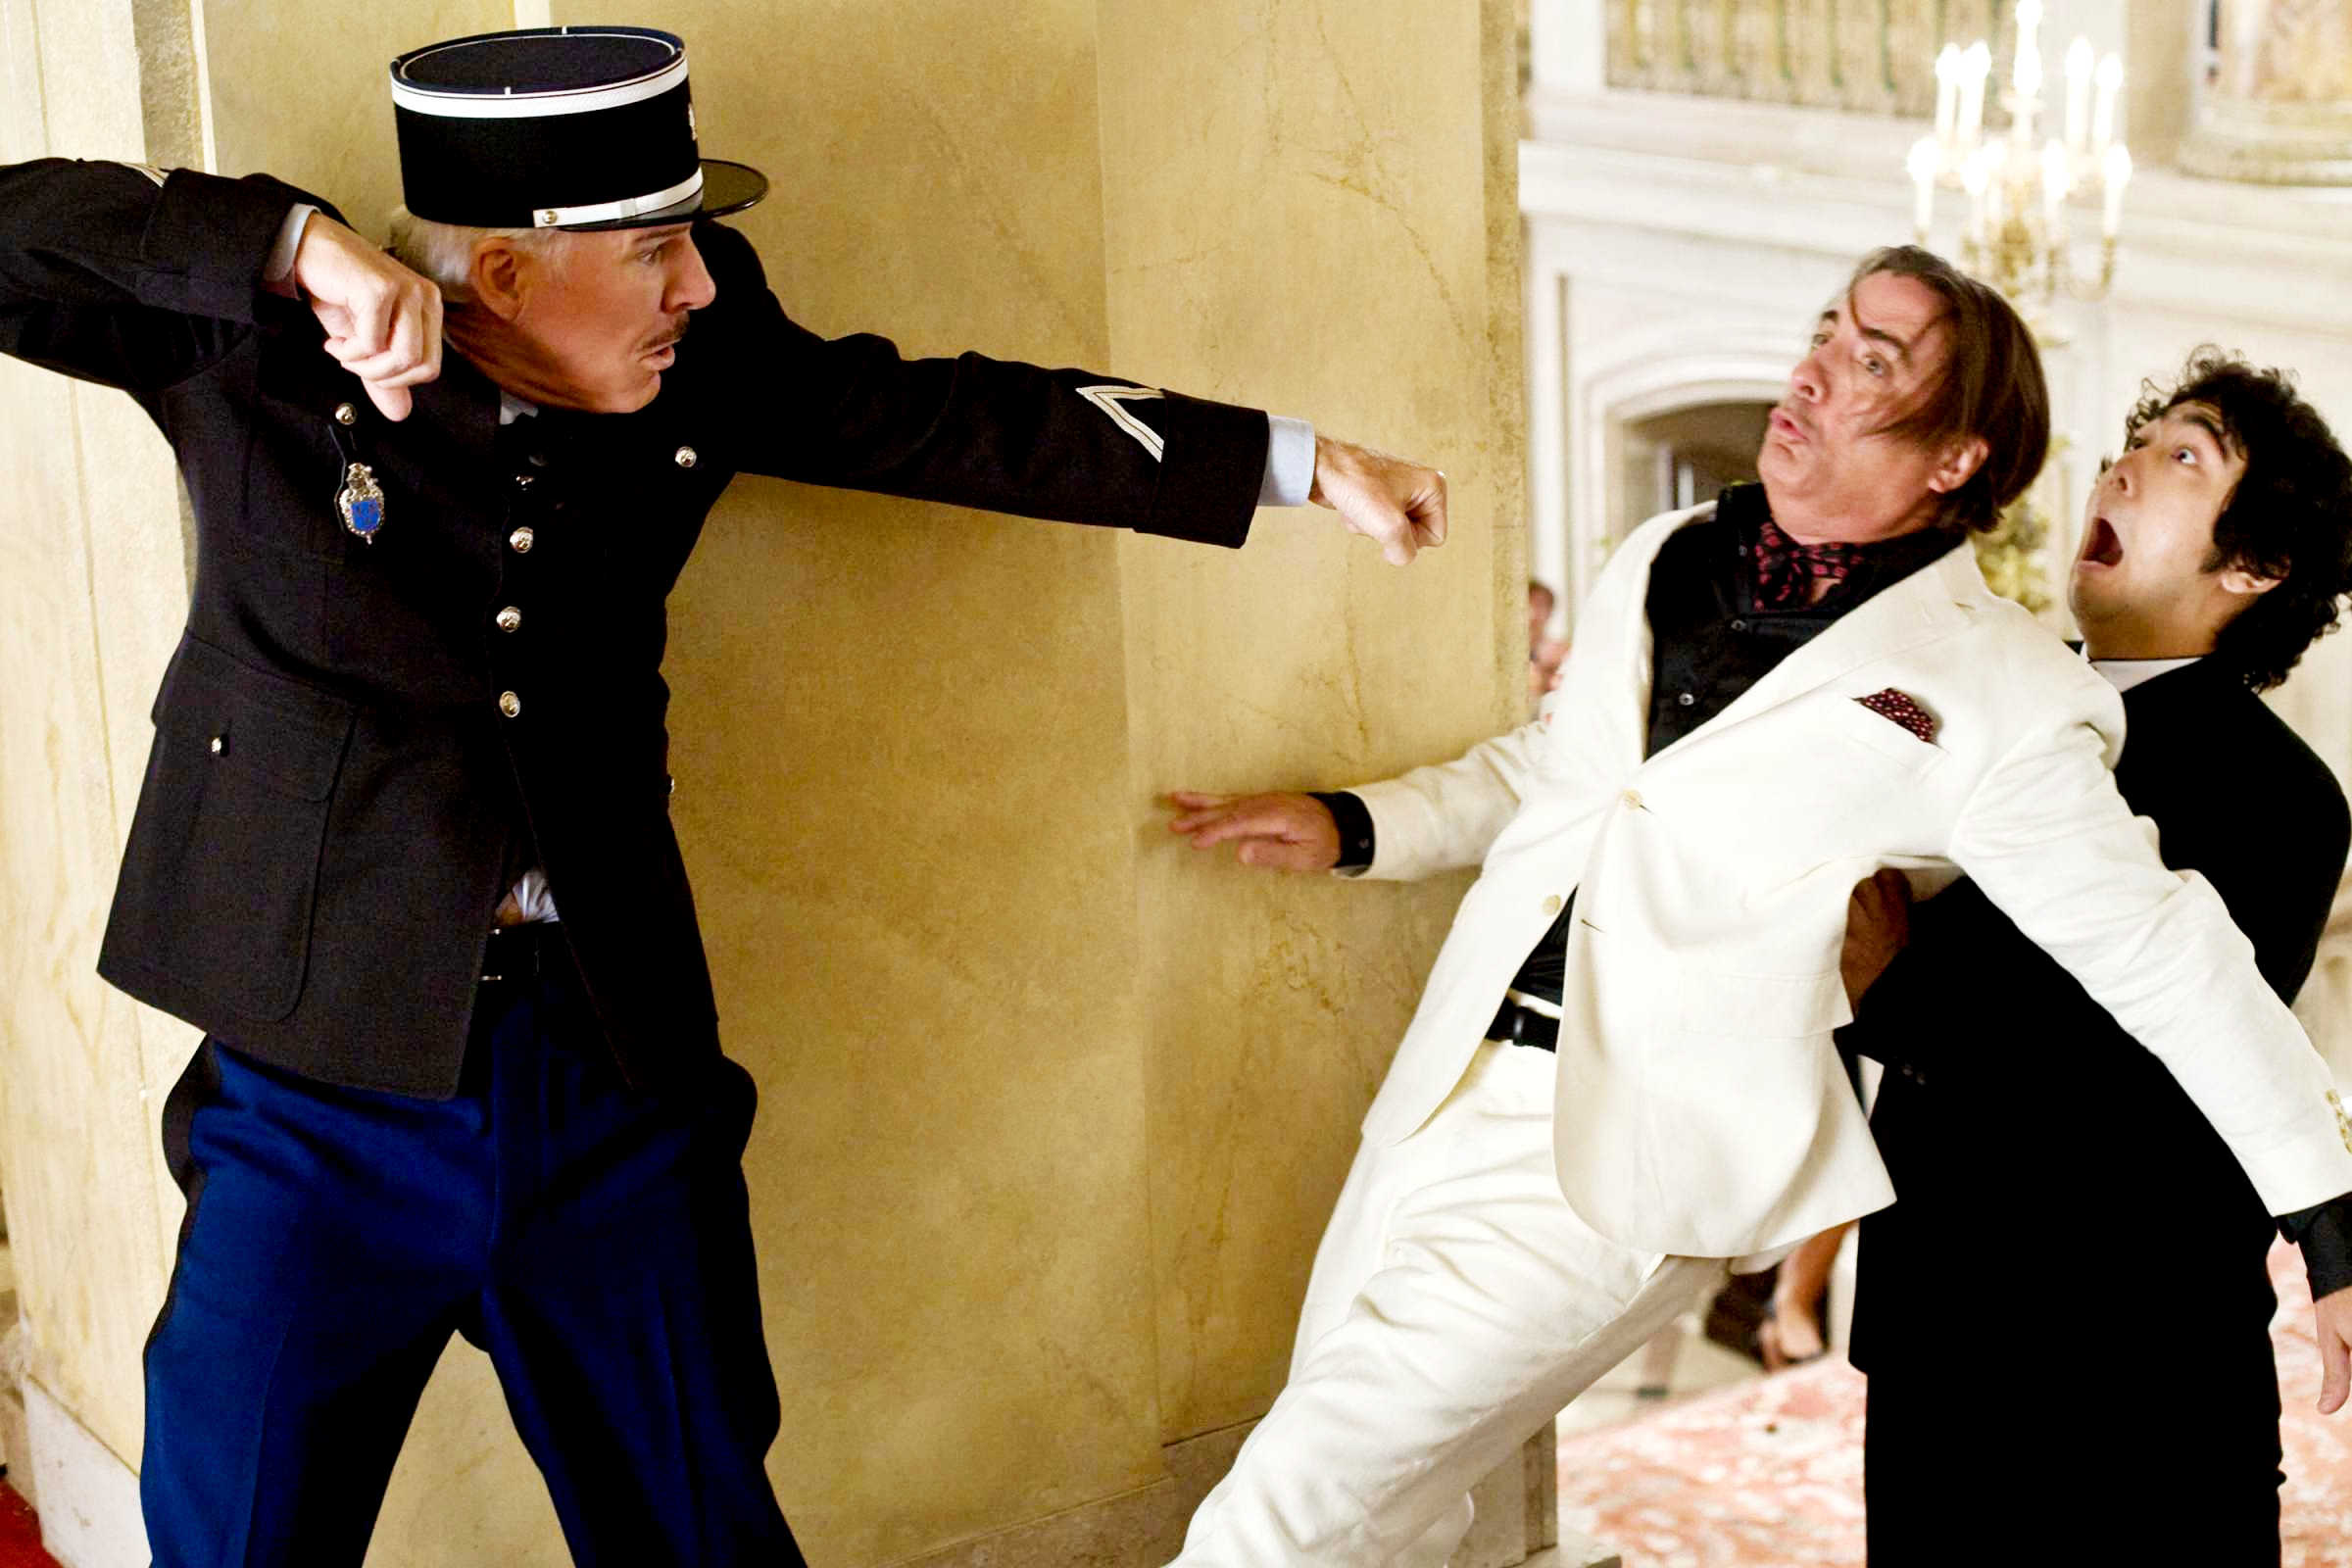 Steve Martin, Andy Garcia and Yuki Matsuzaki in Columbia Pictures' The Pink Panther 2 (2009). Photo credit by Peter Iovino.